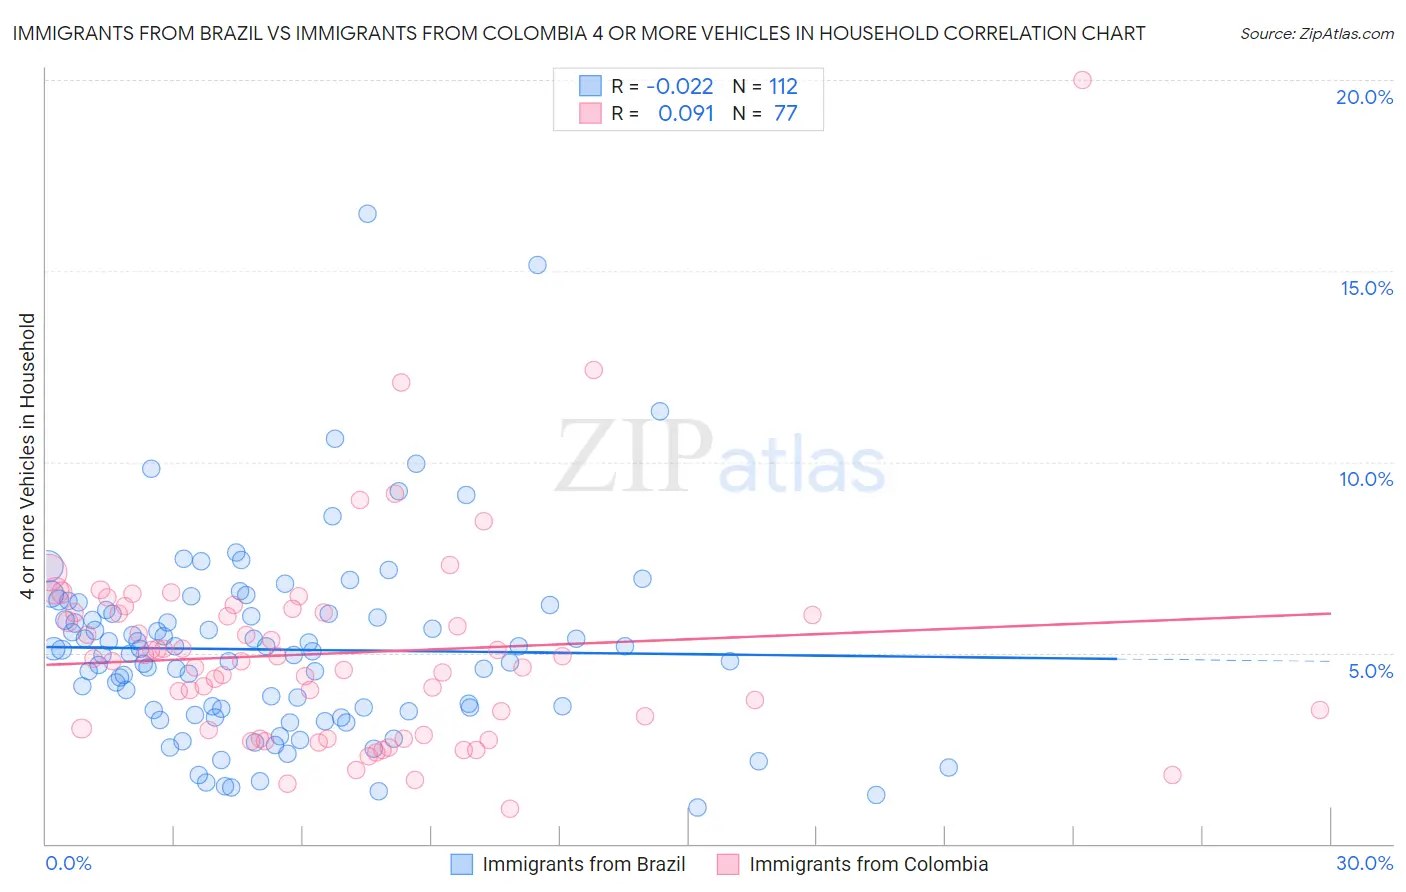 Immigrants from Brazil vs Immigrants from Colombia 4 or more Vehicles in Household